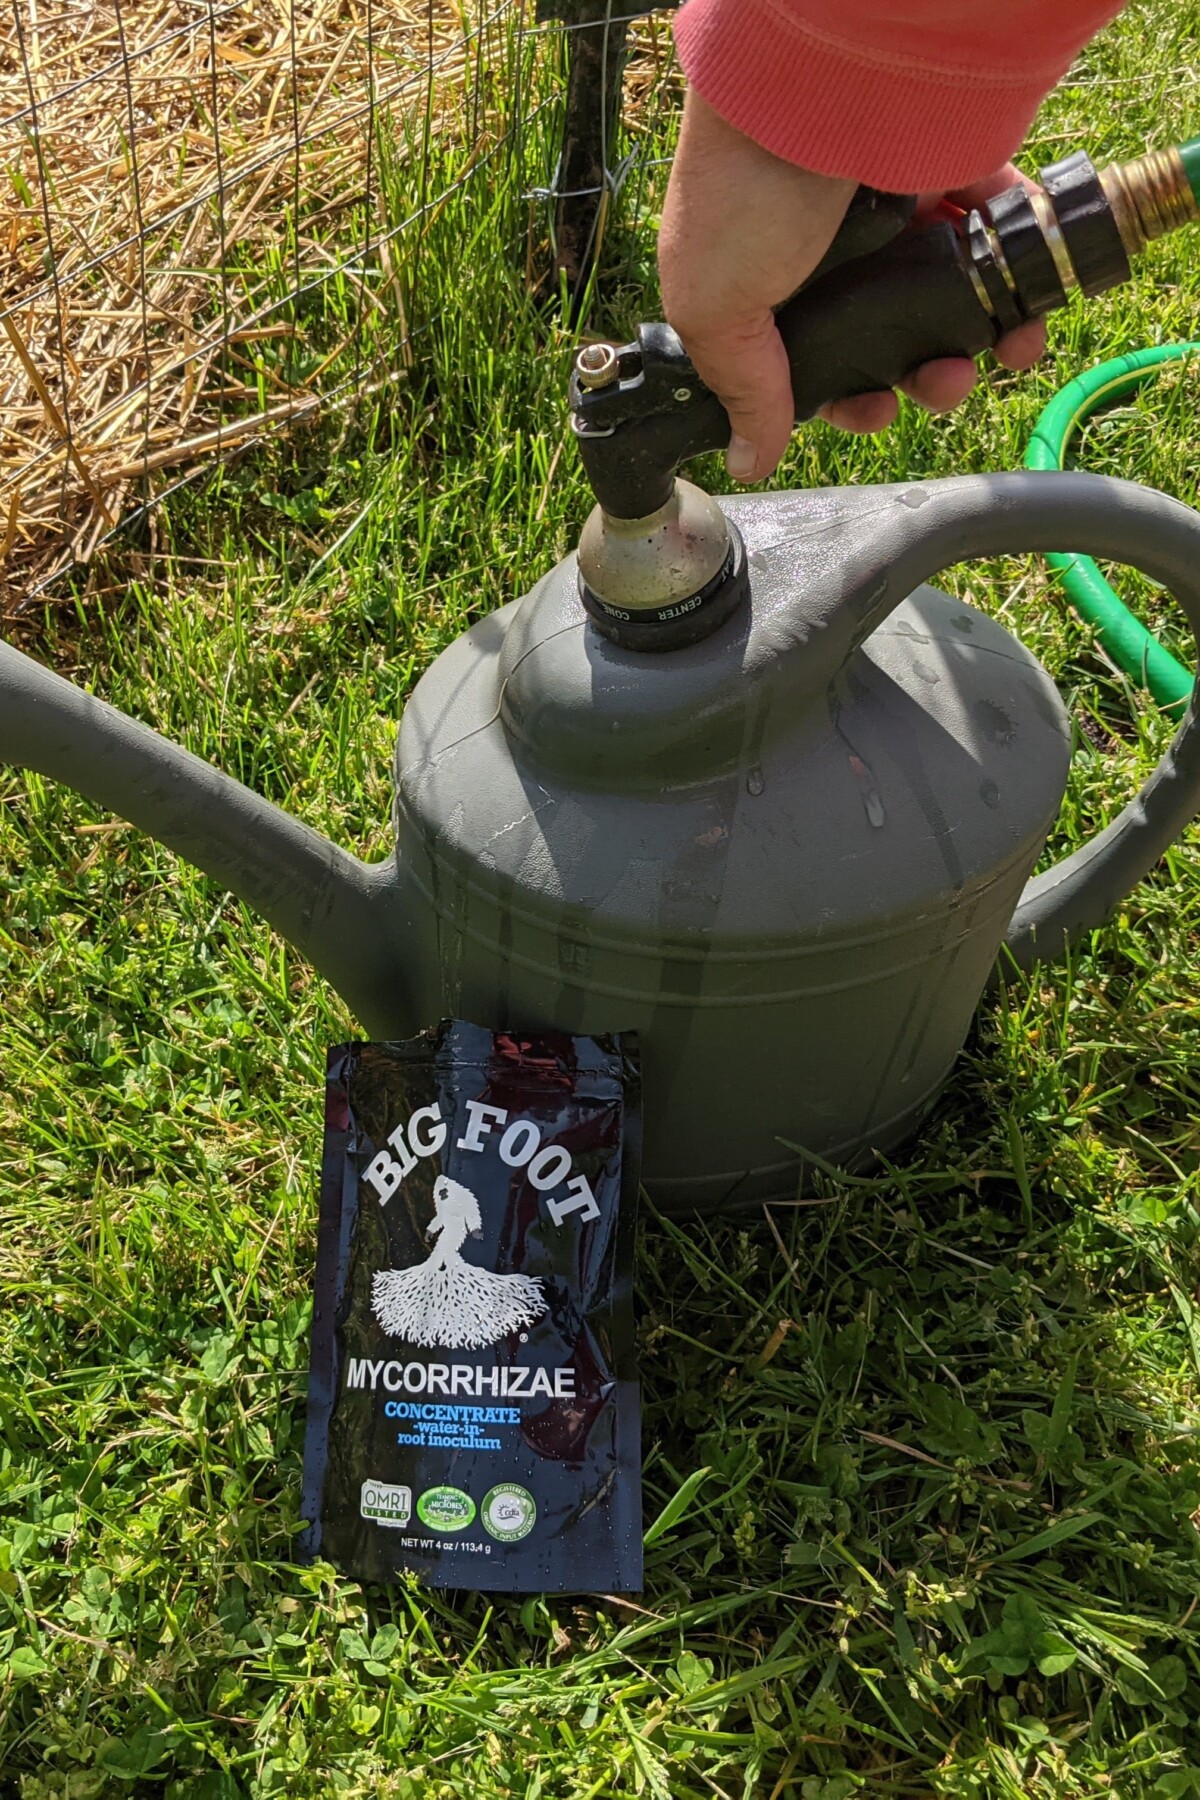 woman's hand filling watering can with a hose, bag of mycorrhizae next to watering can